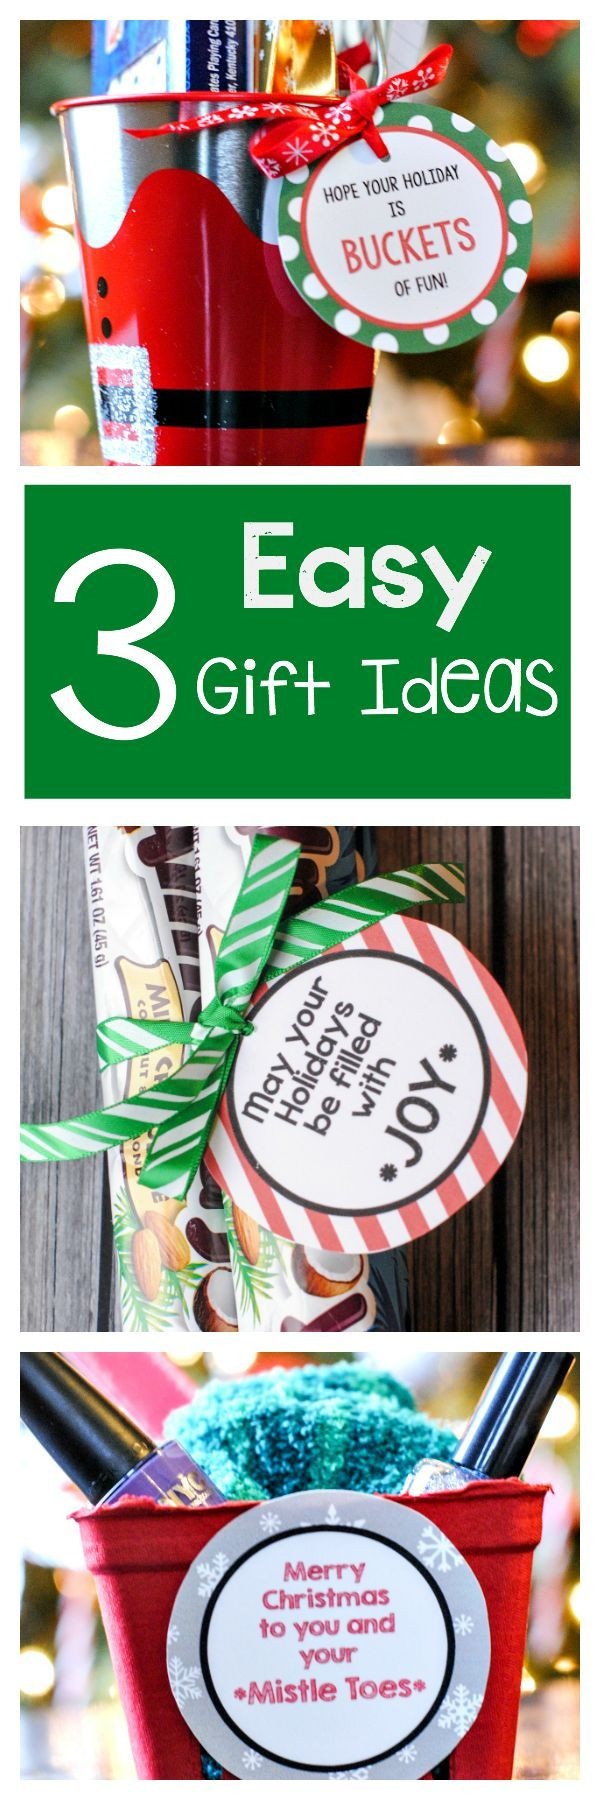 Thank You Gift Ideas For Coworkers Homemade
 The 25 best Thank you t ideas for coworkers ideas on